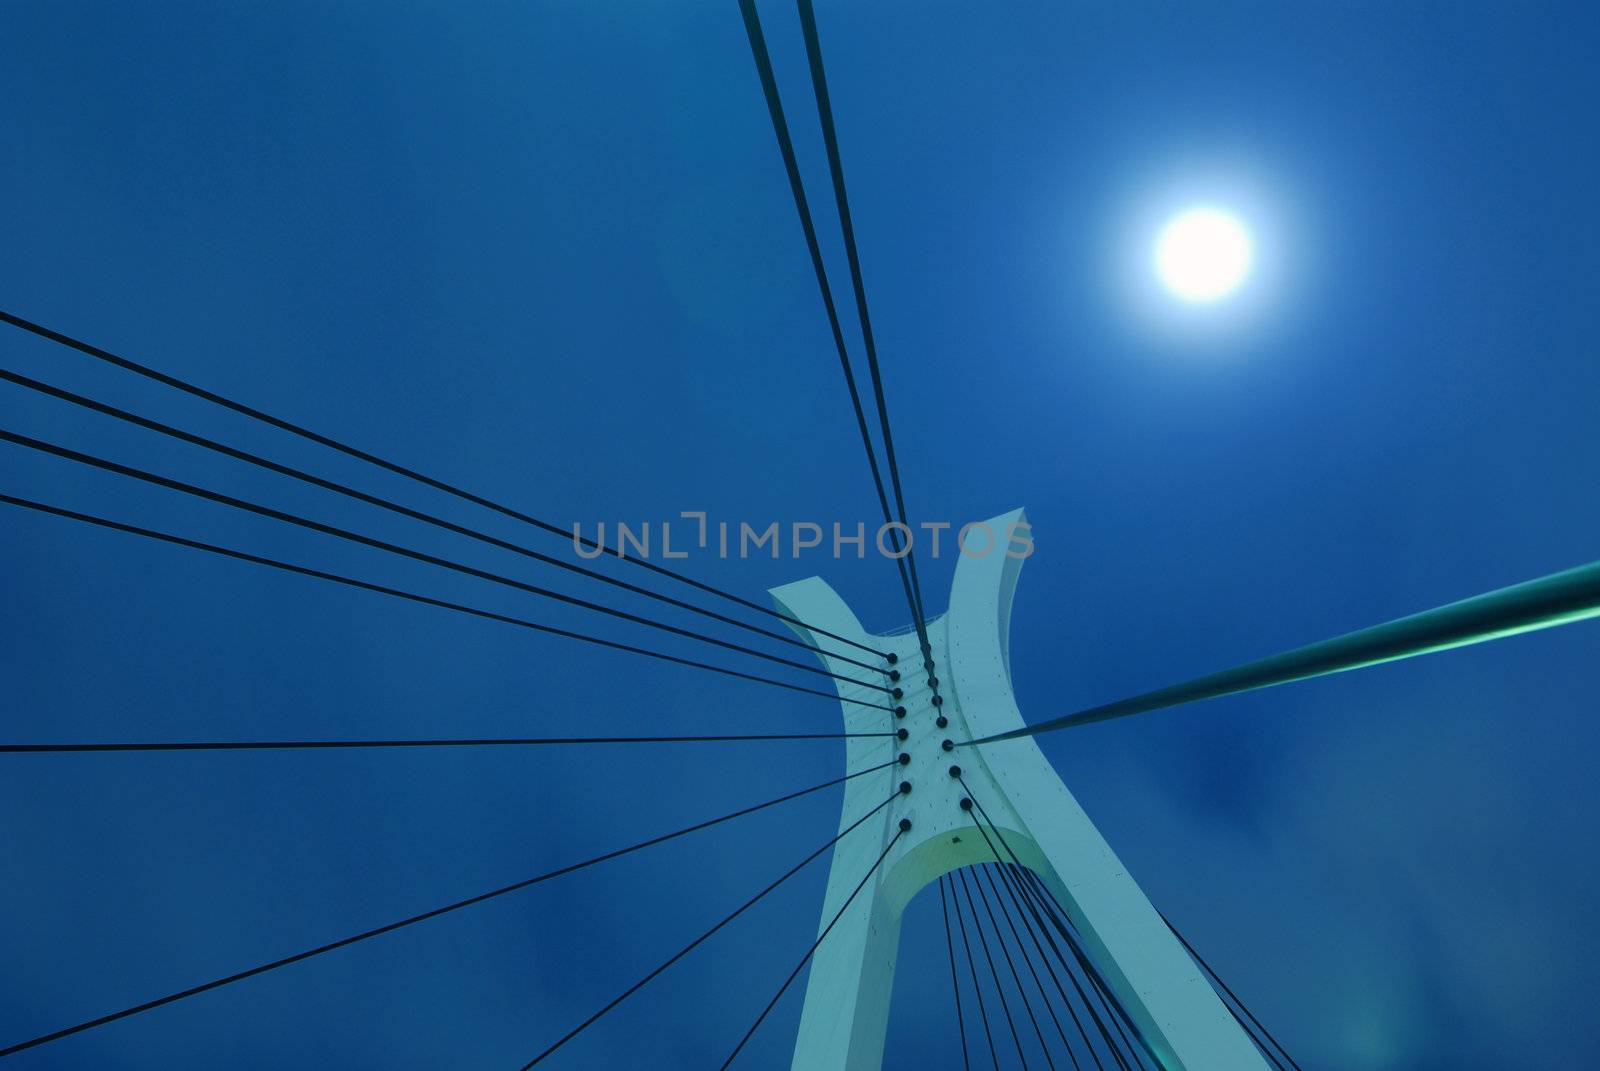 abstract suspension bridge elements on the night city sky with full moon